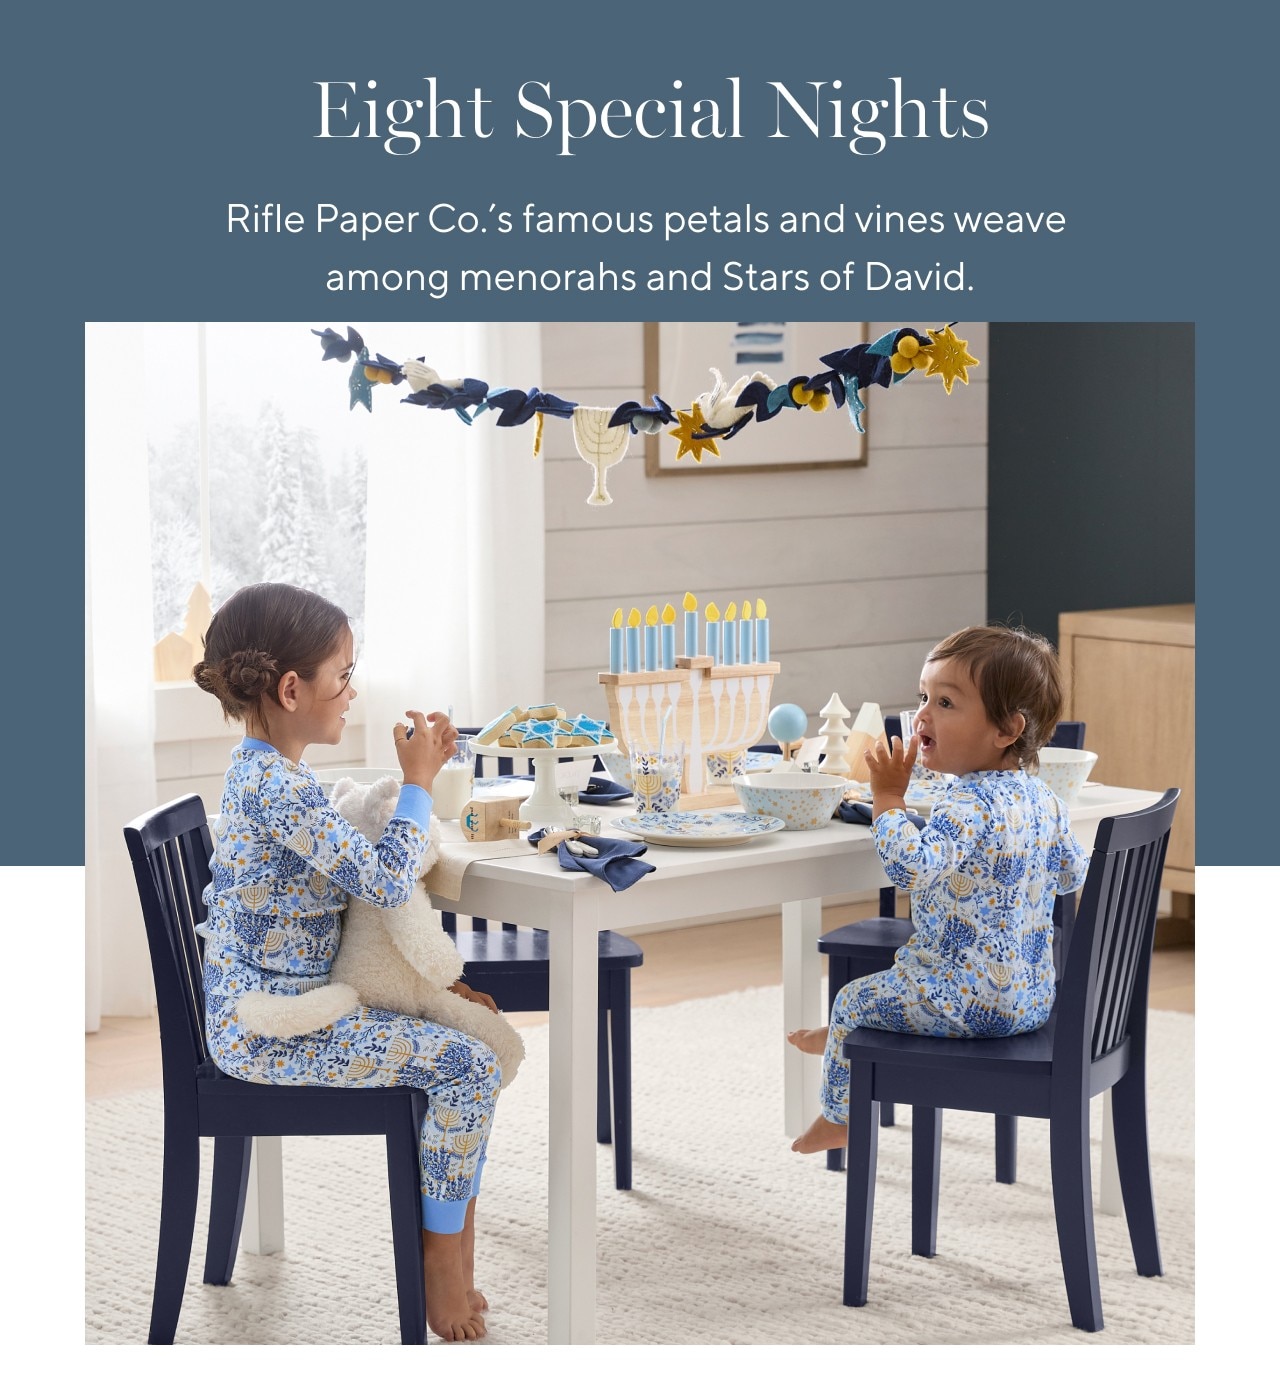 EIGHT SPECIAL NIGHTS